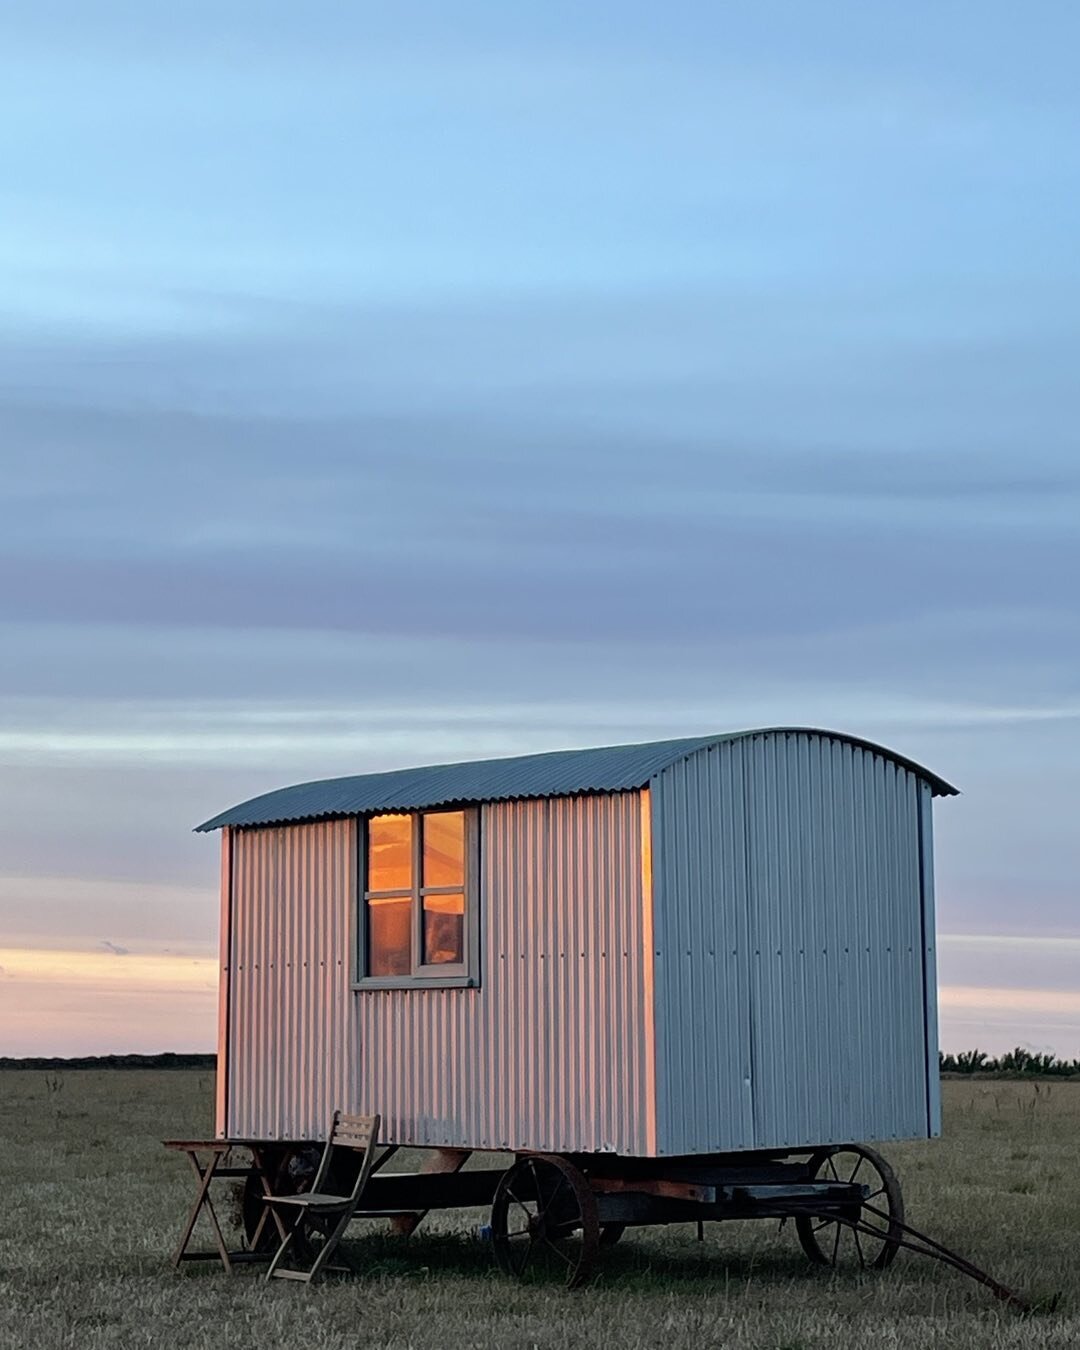 // WATCH THIS SPACE //

📣We have listened to your feedback &amp; also answered our own callings to add a few more magical spaces to the field this year. ✨

We are in the process of turning our shepherds hut into a beautiful boudoir that will be avai